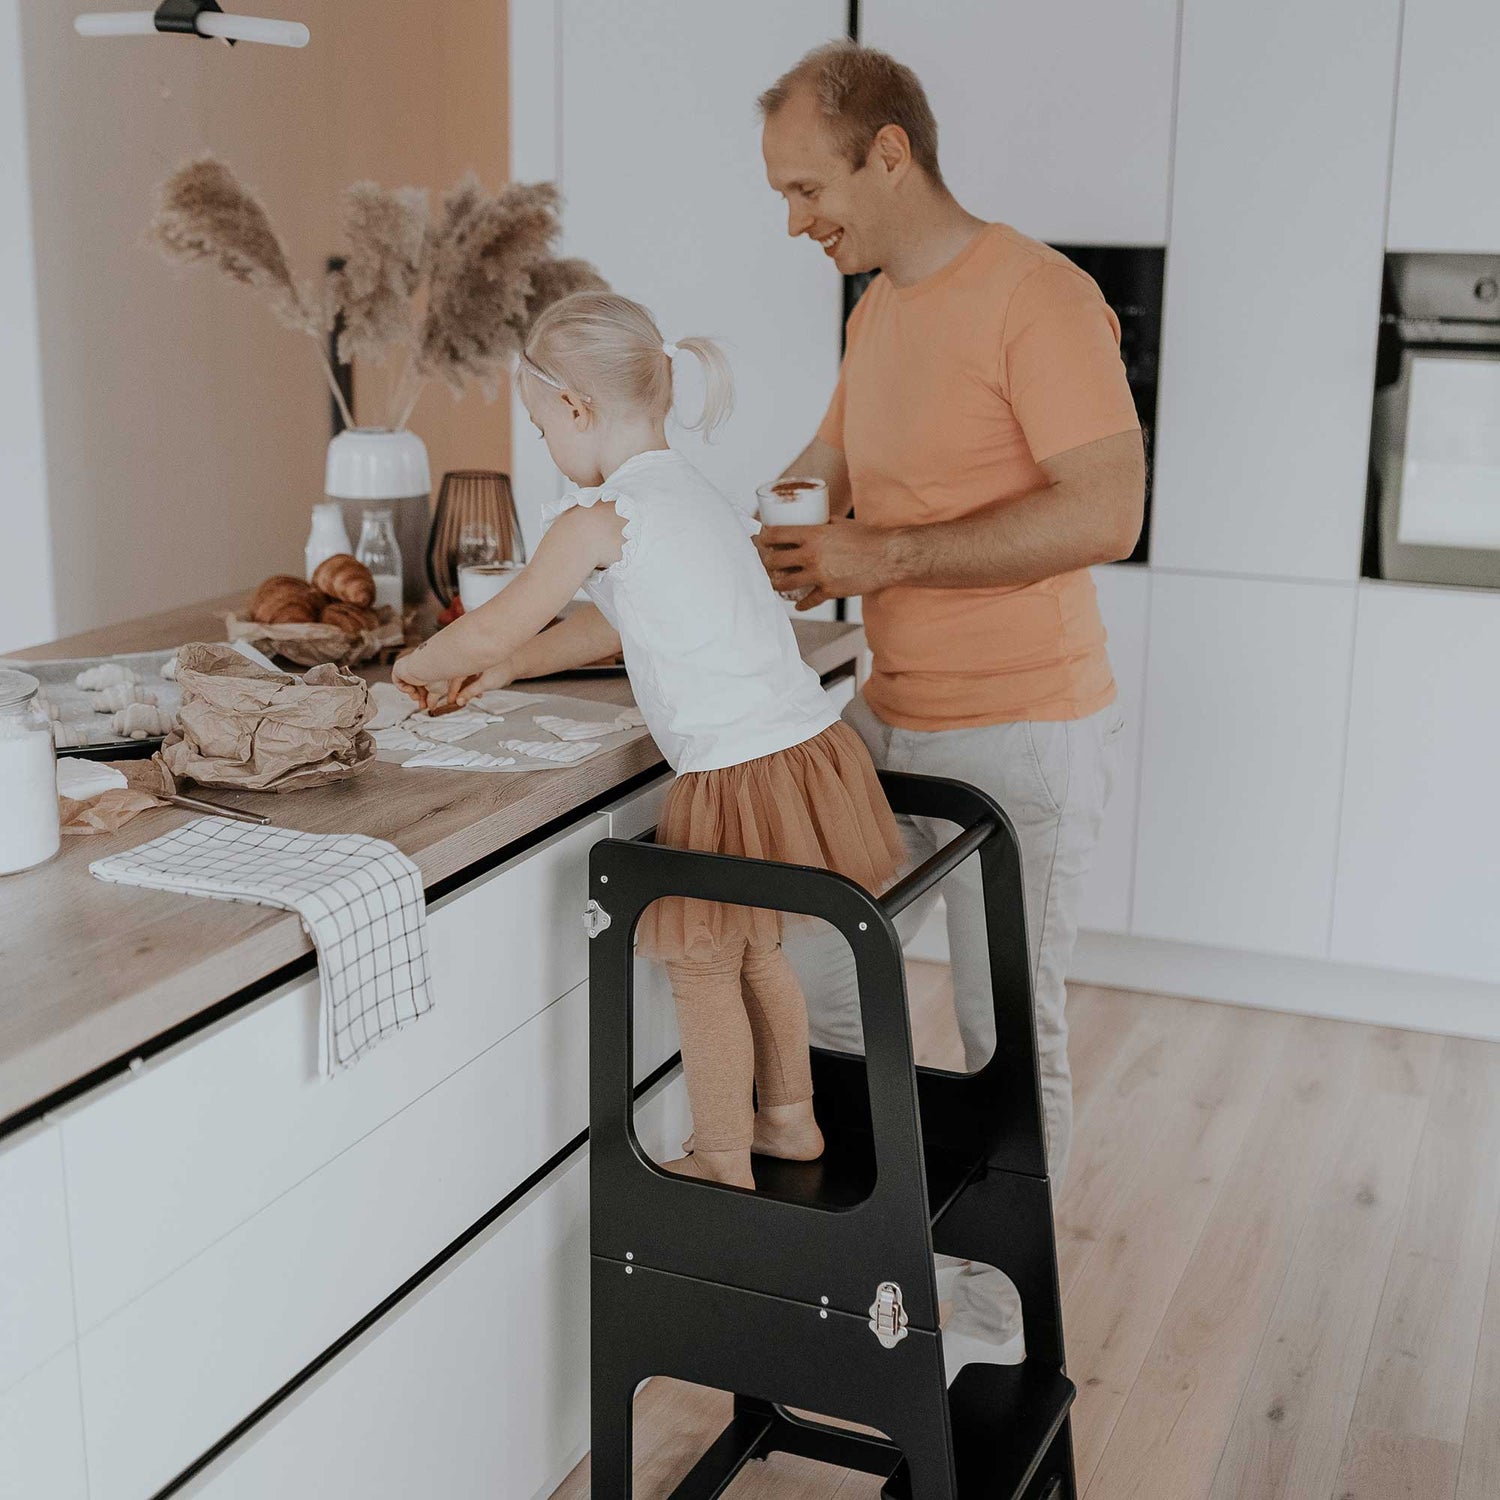 A man and a child standing on a step stool in a kitchen.